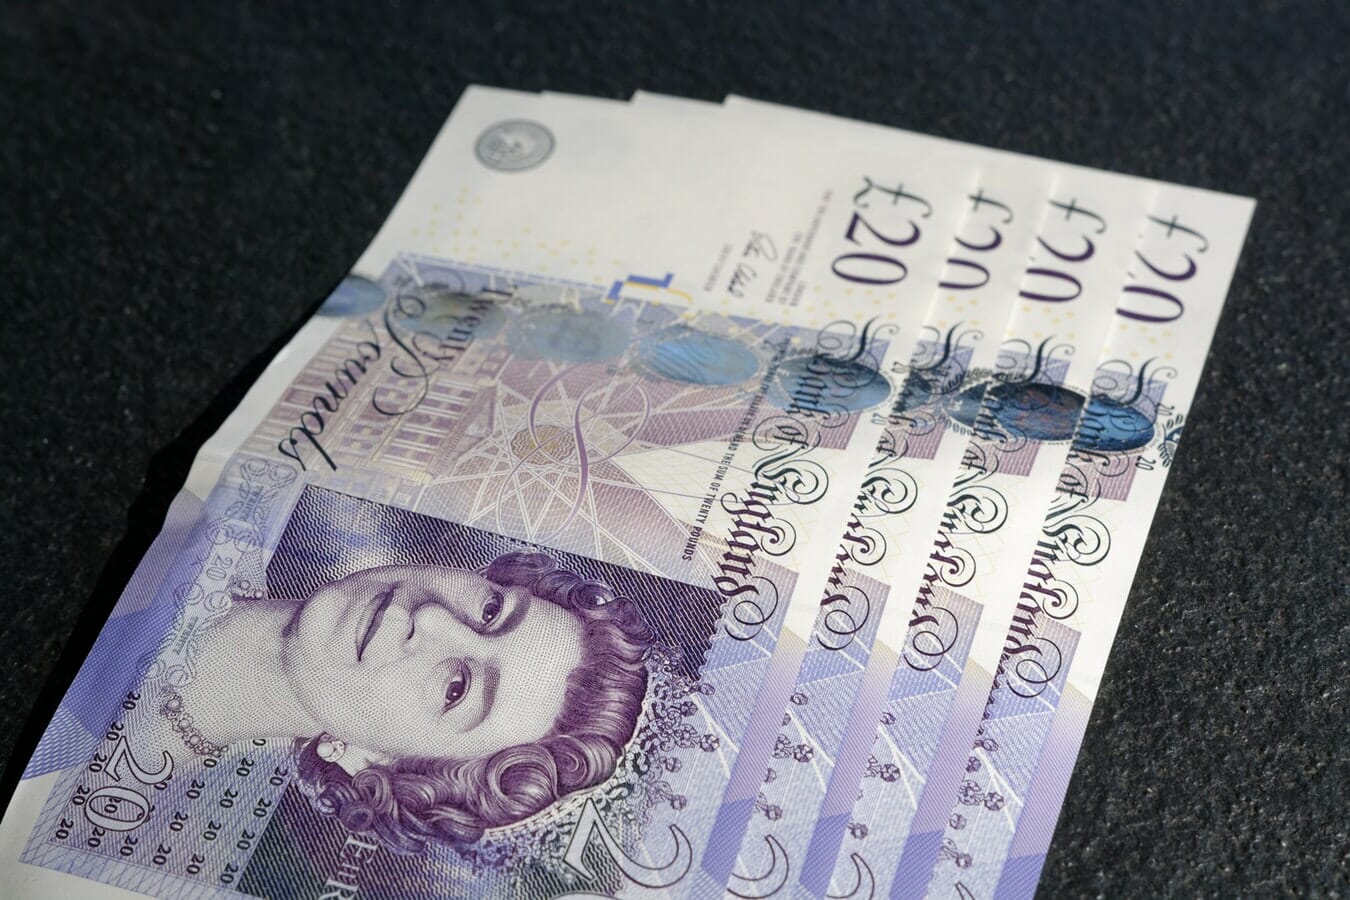 British banknotes on a black surface.